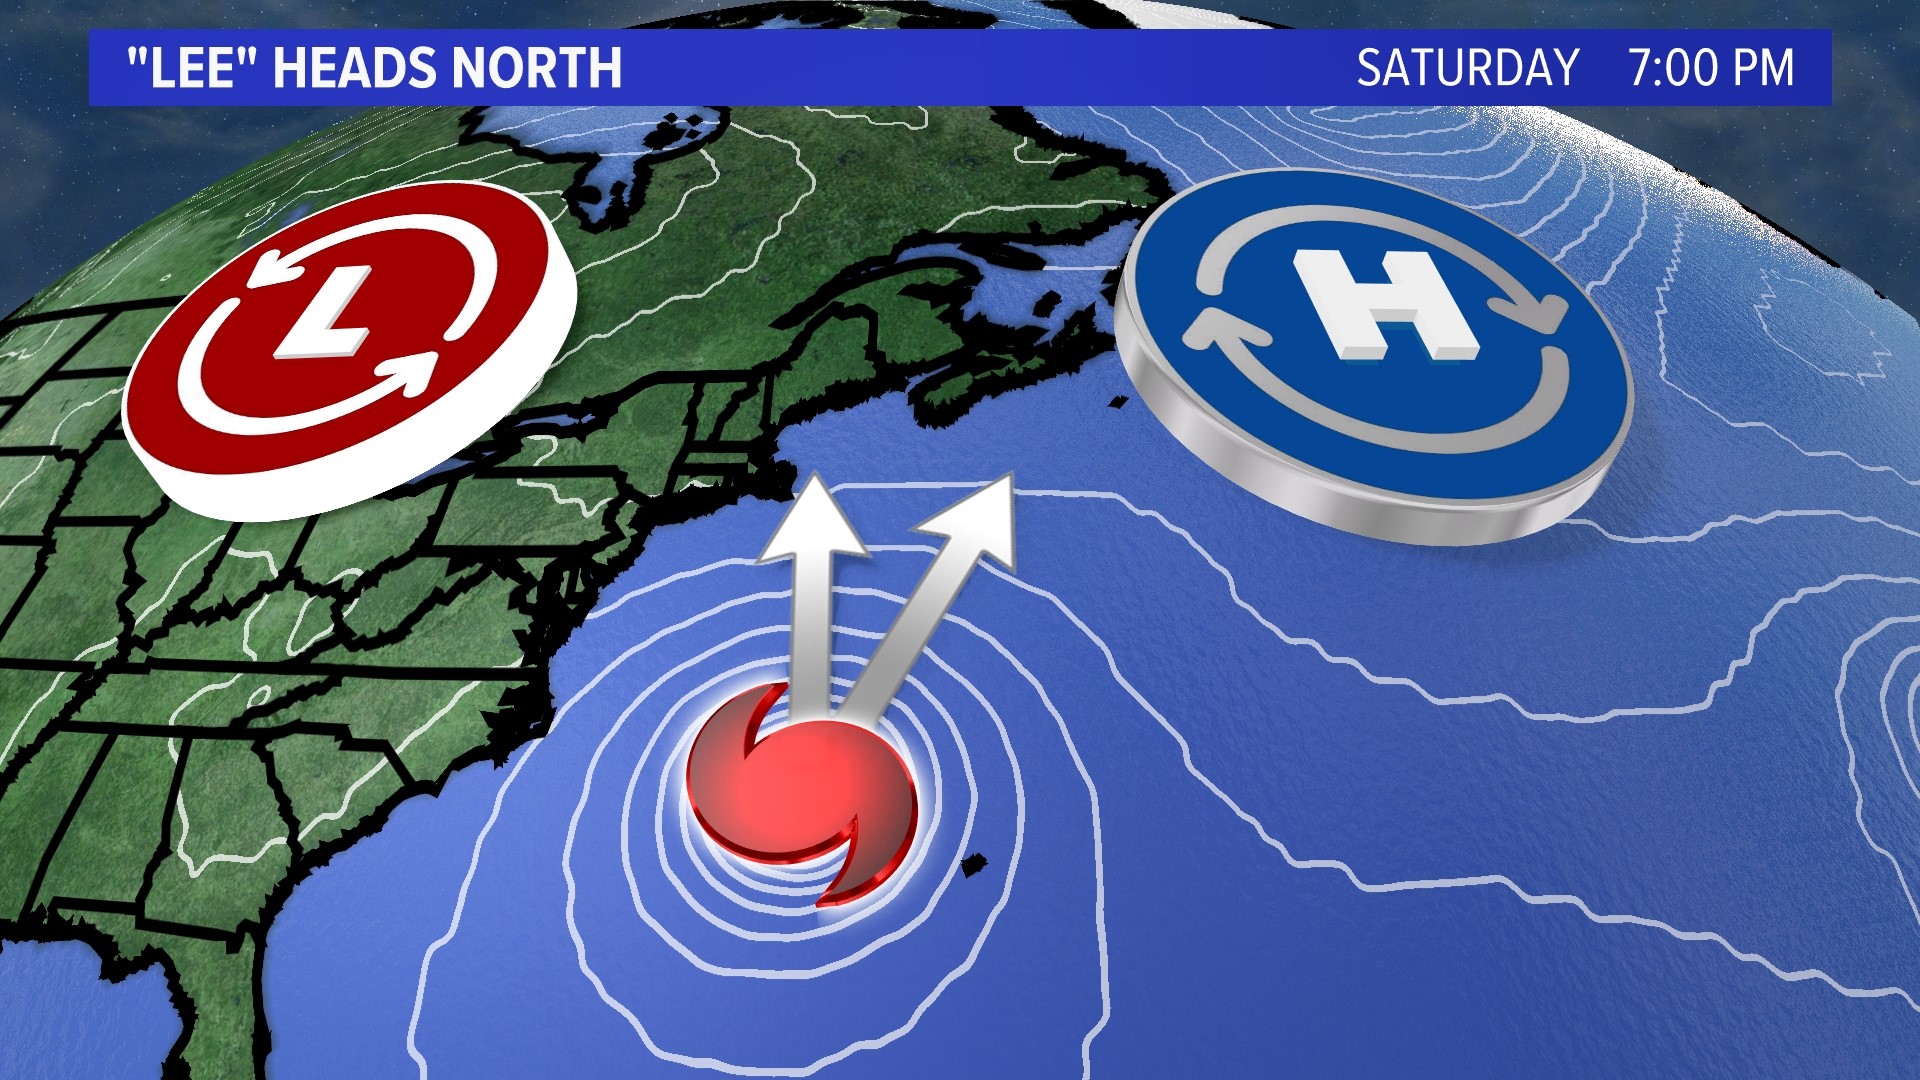 Lee is forecast to slow down in the Atlantic this week before getting a nudge northward.